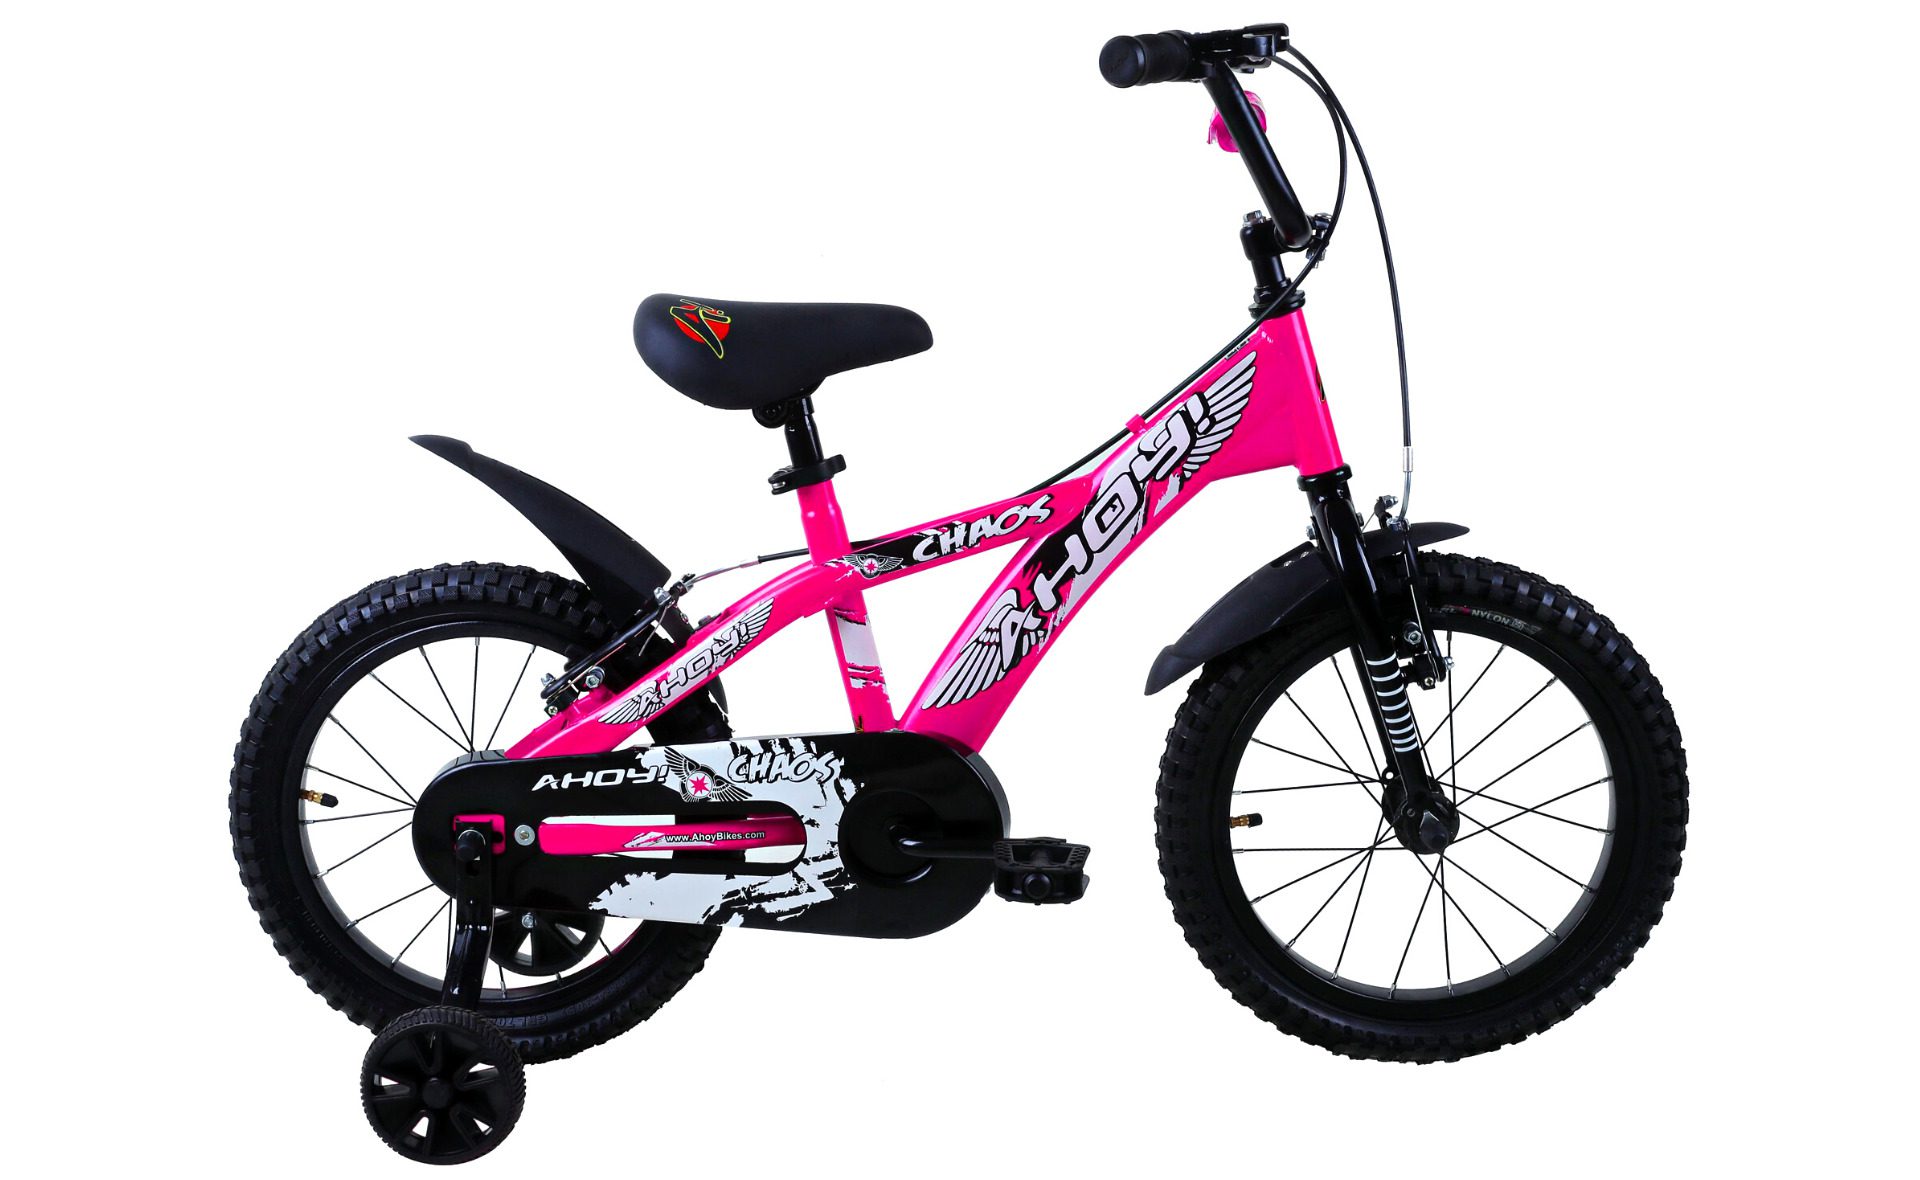 Chaos Girls Bike 20T Single Speed | Buy Pink Cycle Non Gear for Kids